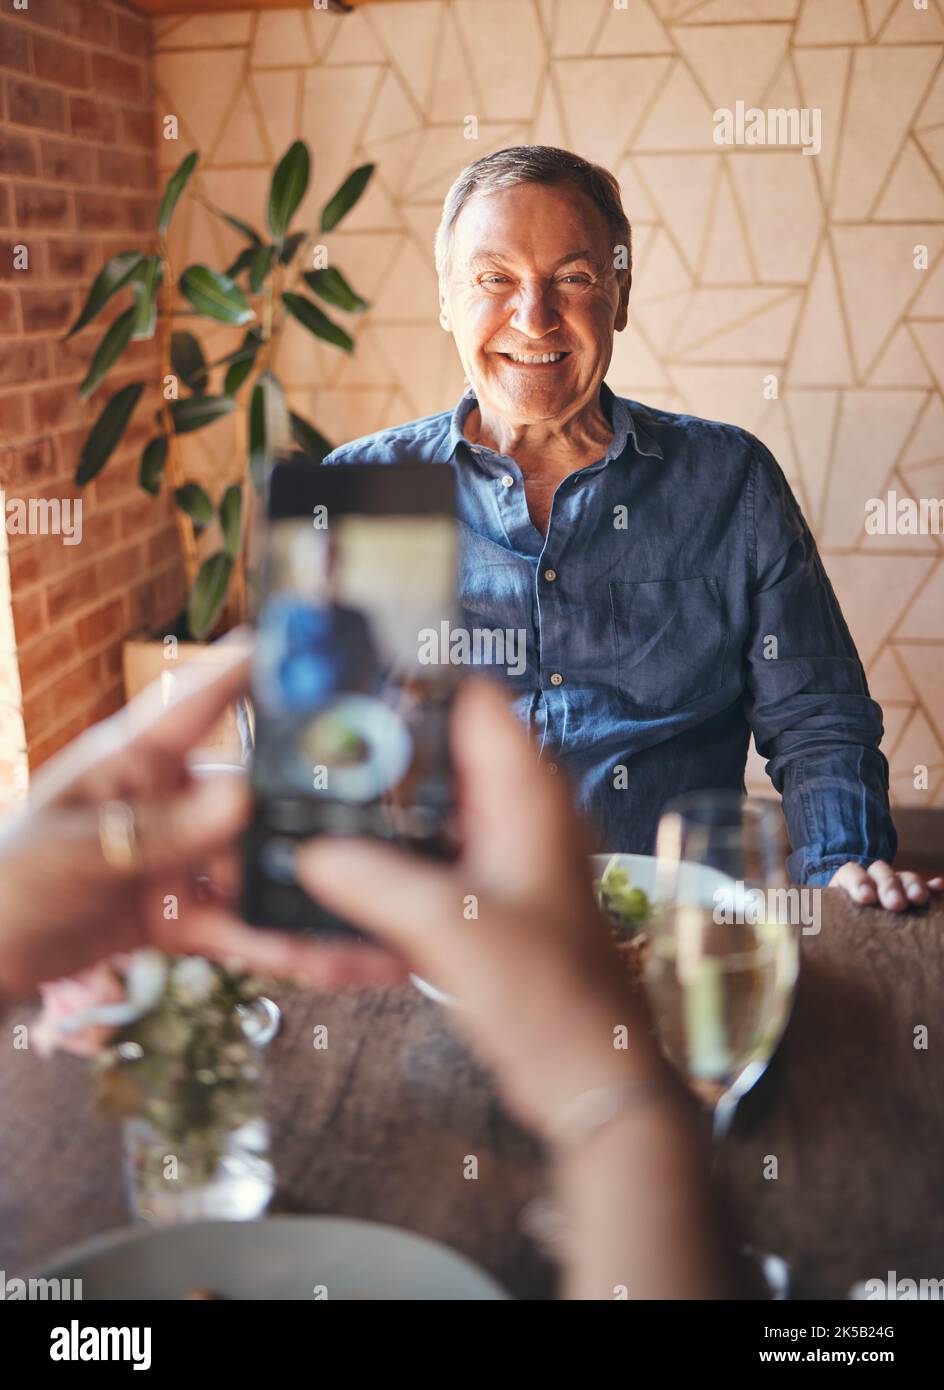 Senior man, phone and smile for picture on travel, vacation or restaurant experience while excited and happy at table. Elderly male tourist smiling Stock Photo